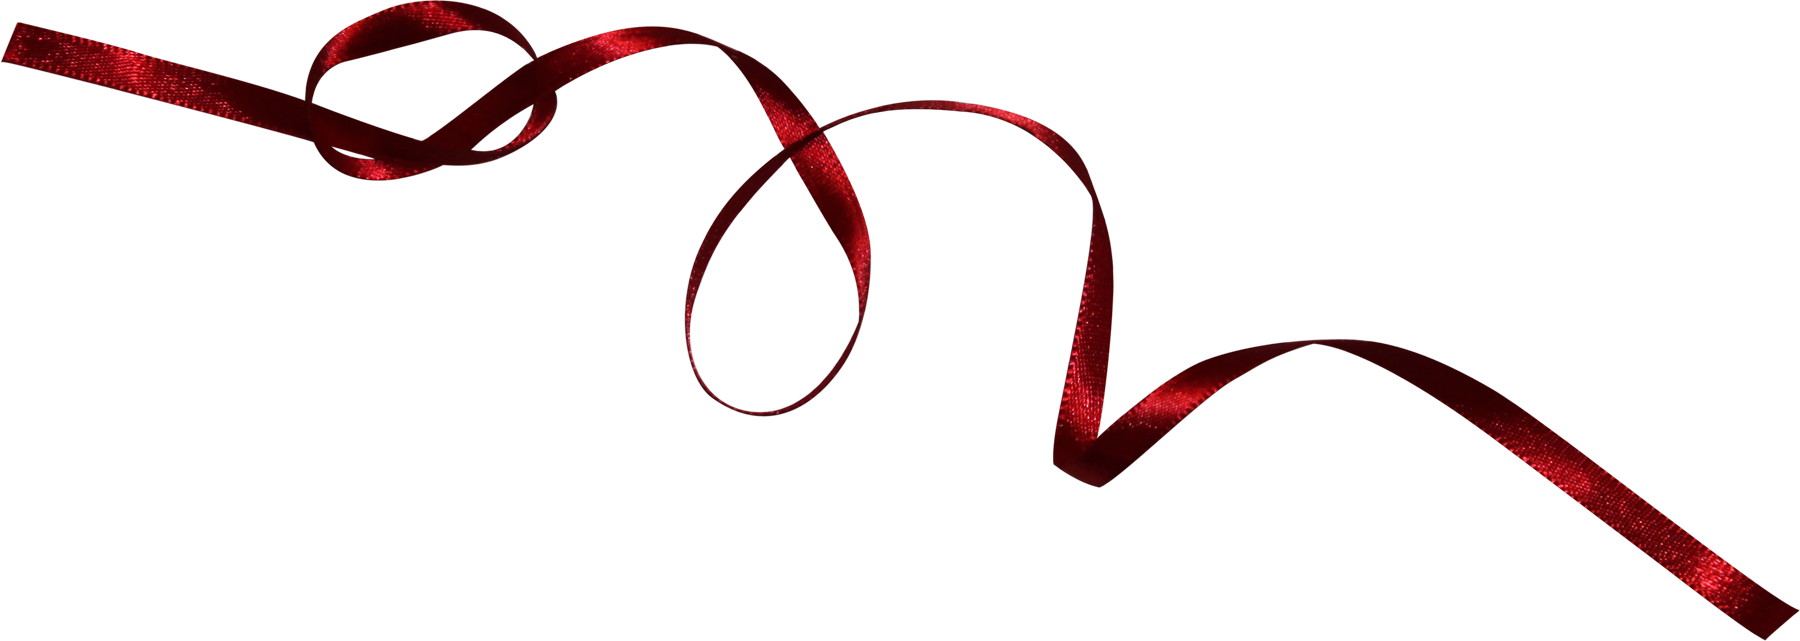 Free Red Swirl Png, Download Free Clip Art, Free Clip Art on.